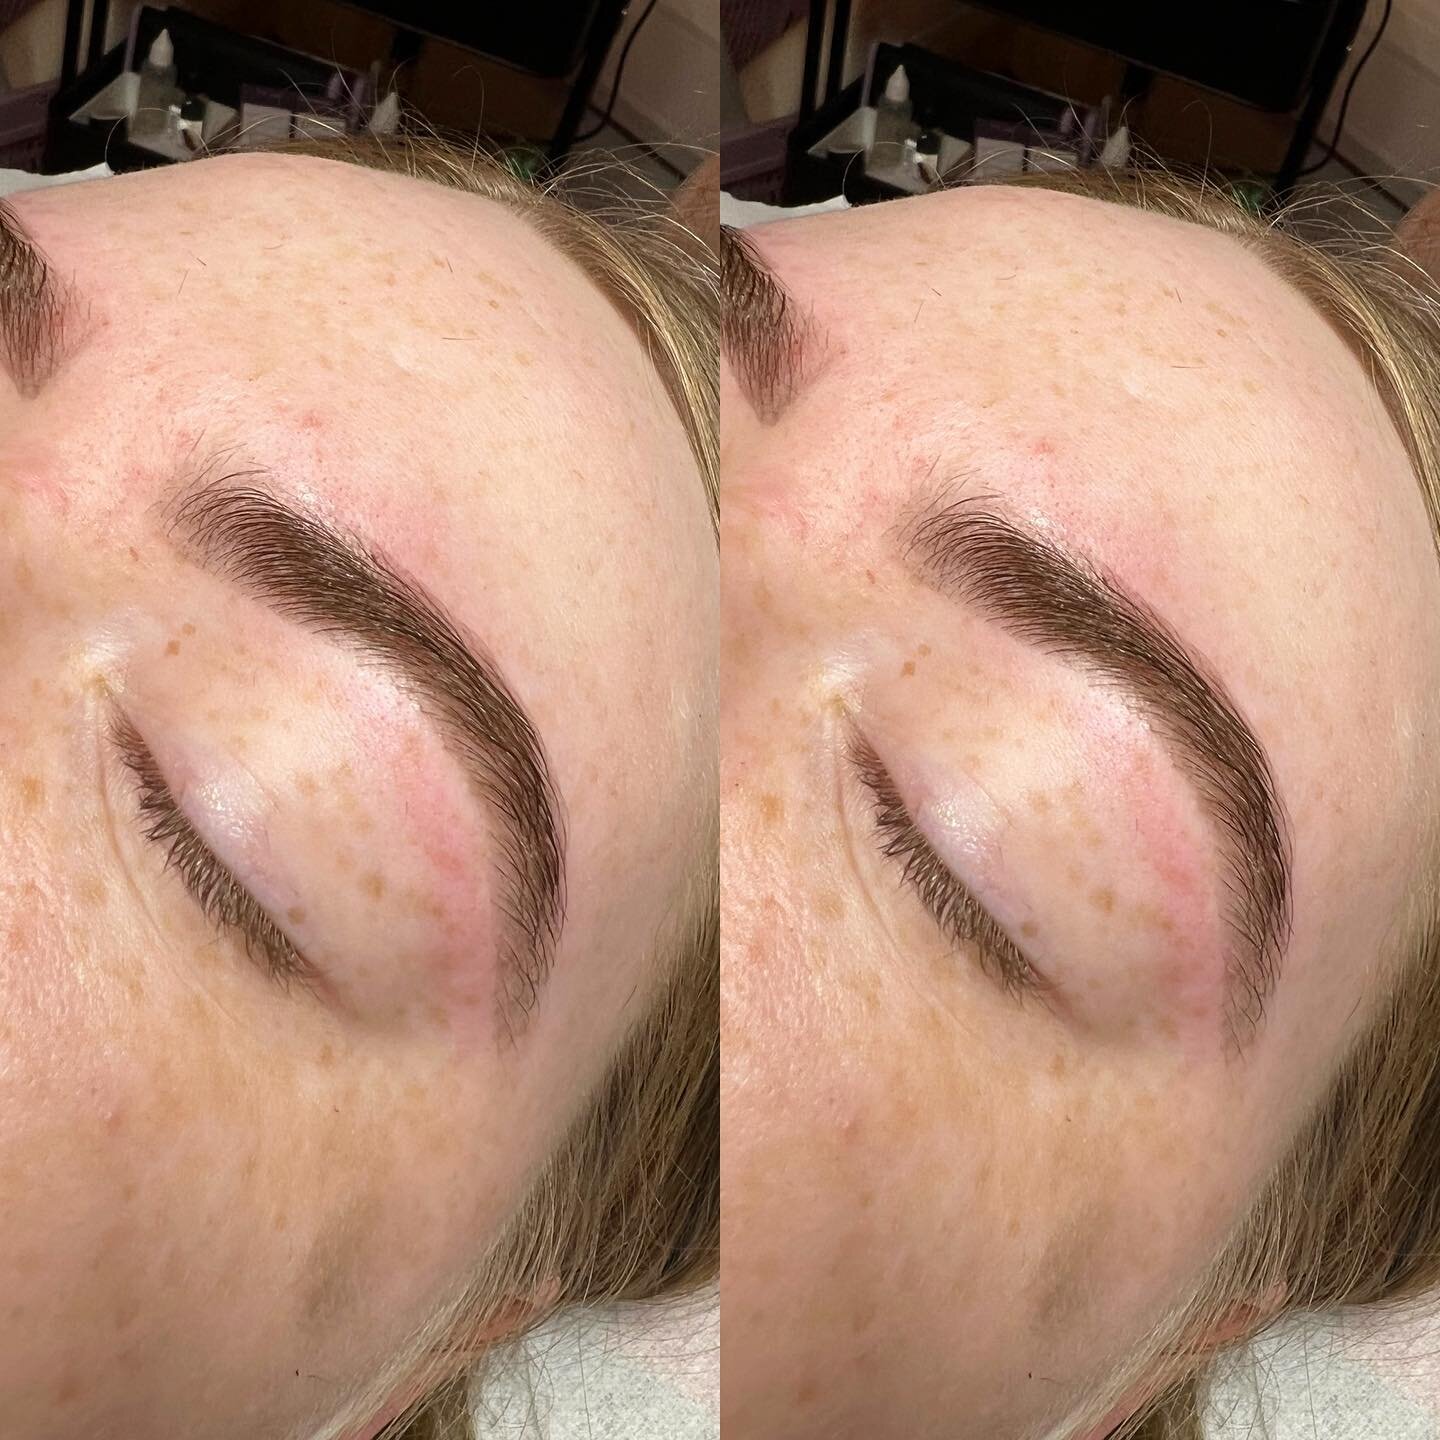 𝕭𝖗𝖔𝖜 𝕿𝖎𝖓𝖙 &amp; 𝕾𝖍𝖆𝖕𝖊❤️&zwj;🔥

Ready for summer with killer brows!! 🔪 
Defined with a simple tint &amp; wax🤩

Appointments available this week🙋🏼&zwj;♀️